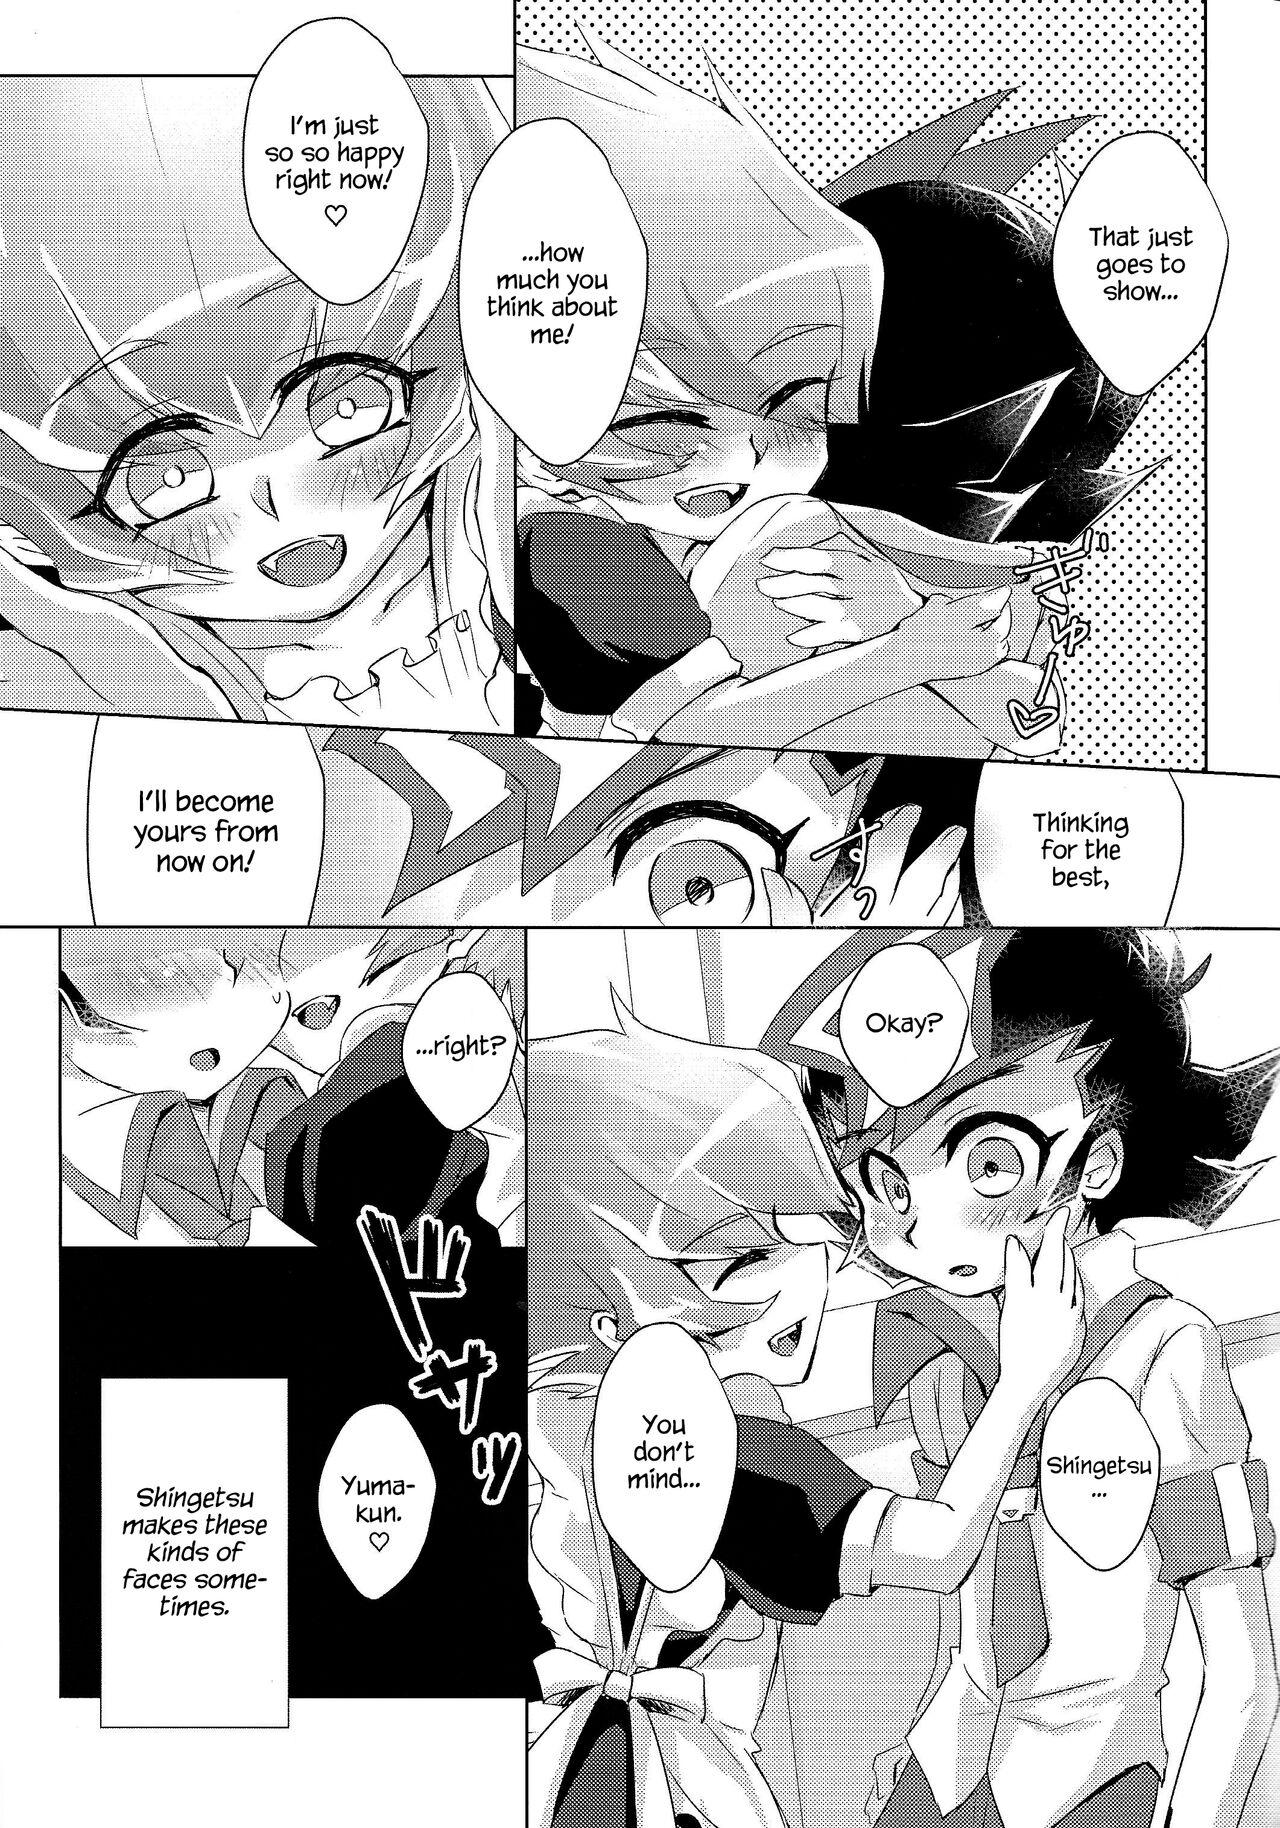 Mistress Stand by me - Yu gi oh zexal Slave - Page 8